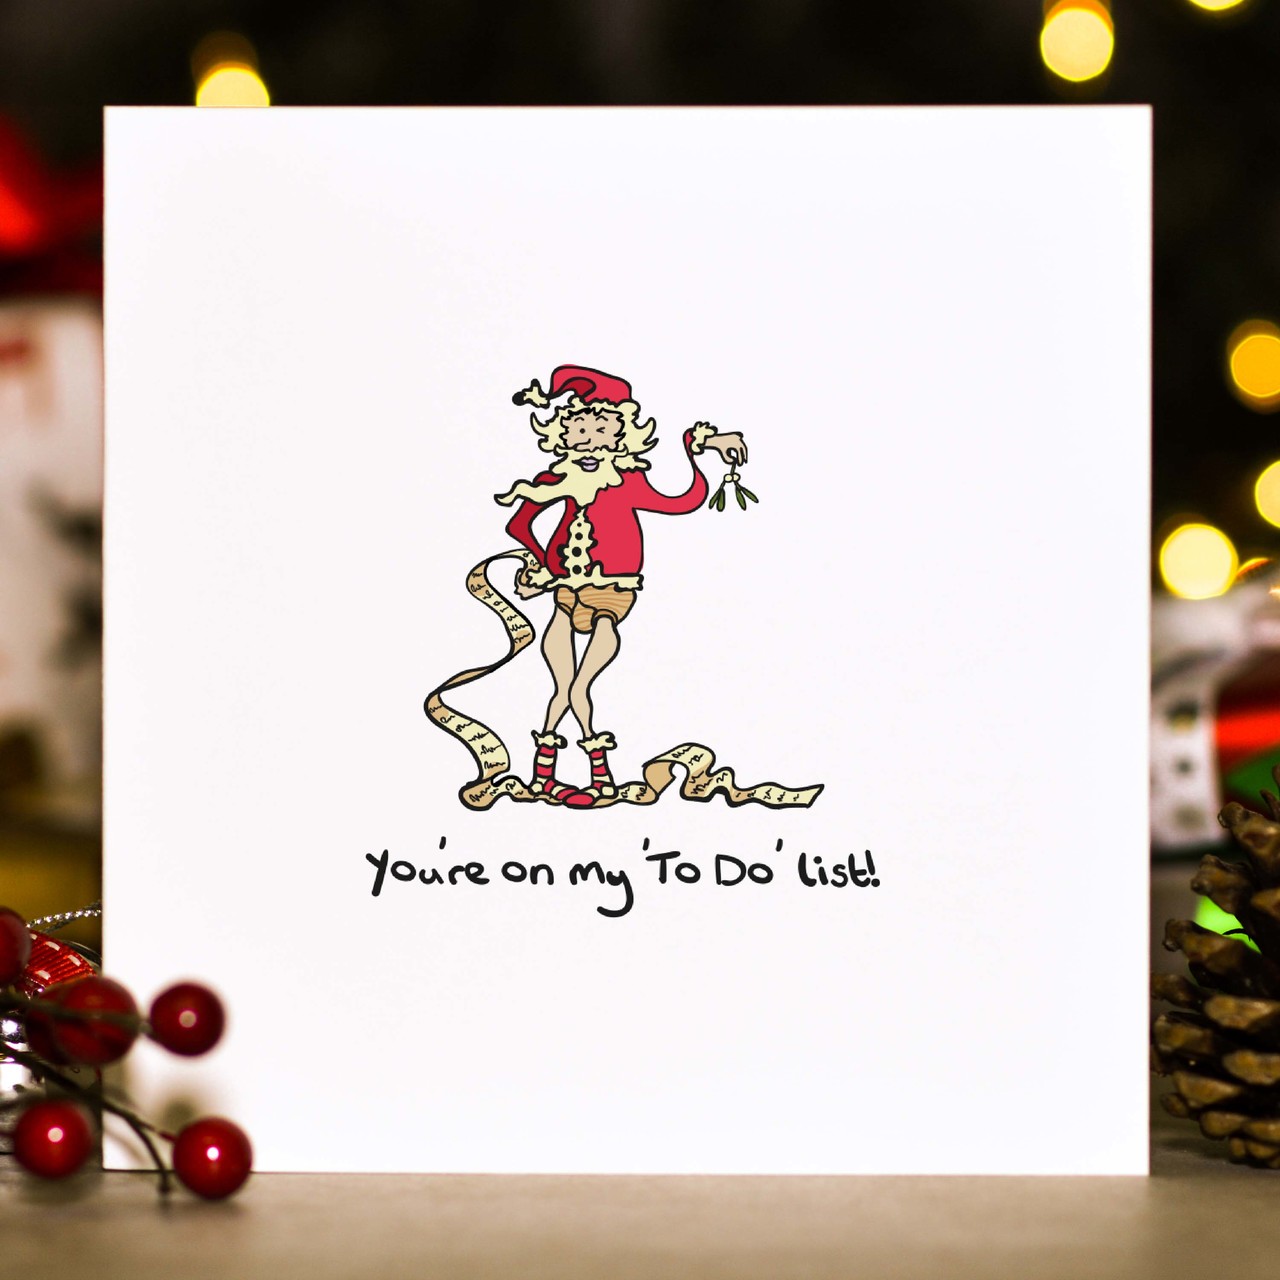 You’re on my ‘To Do’ list! Christmas Card